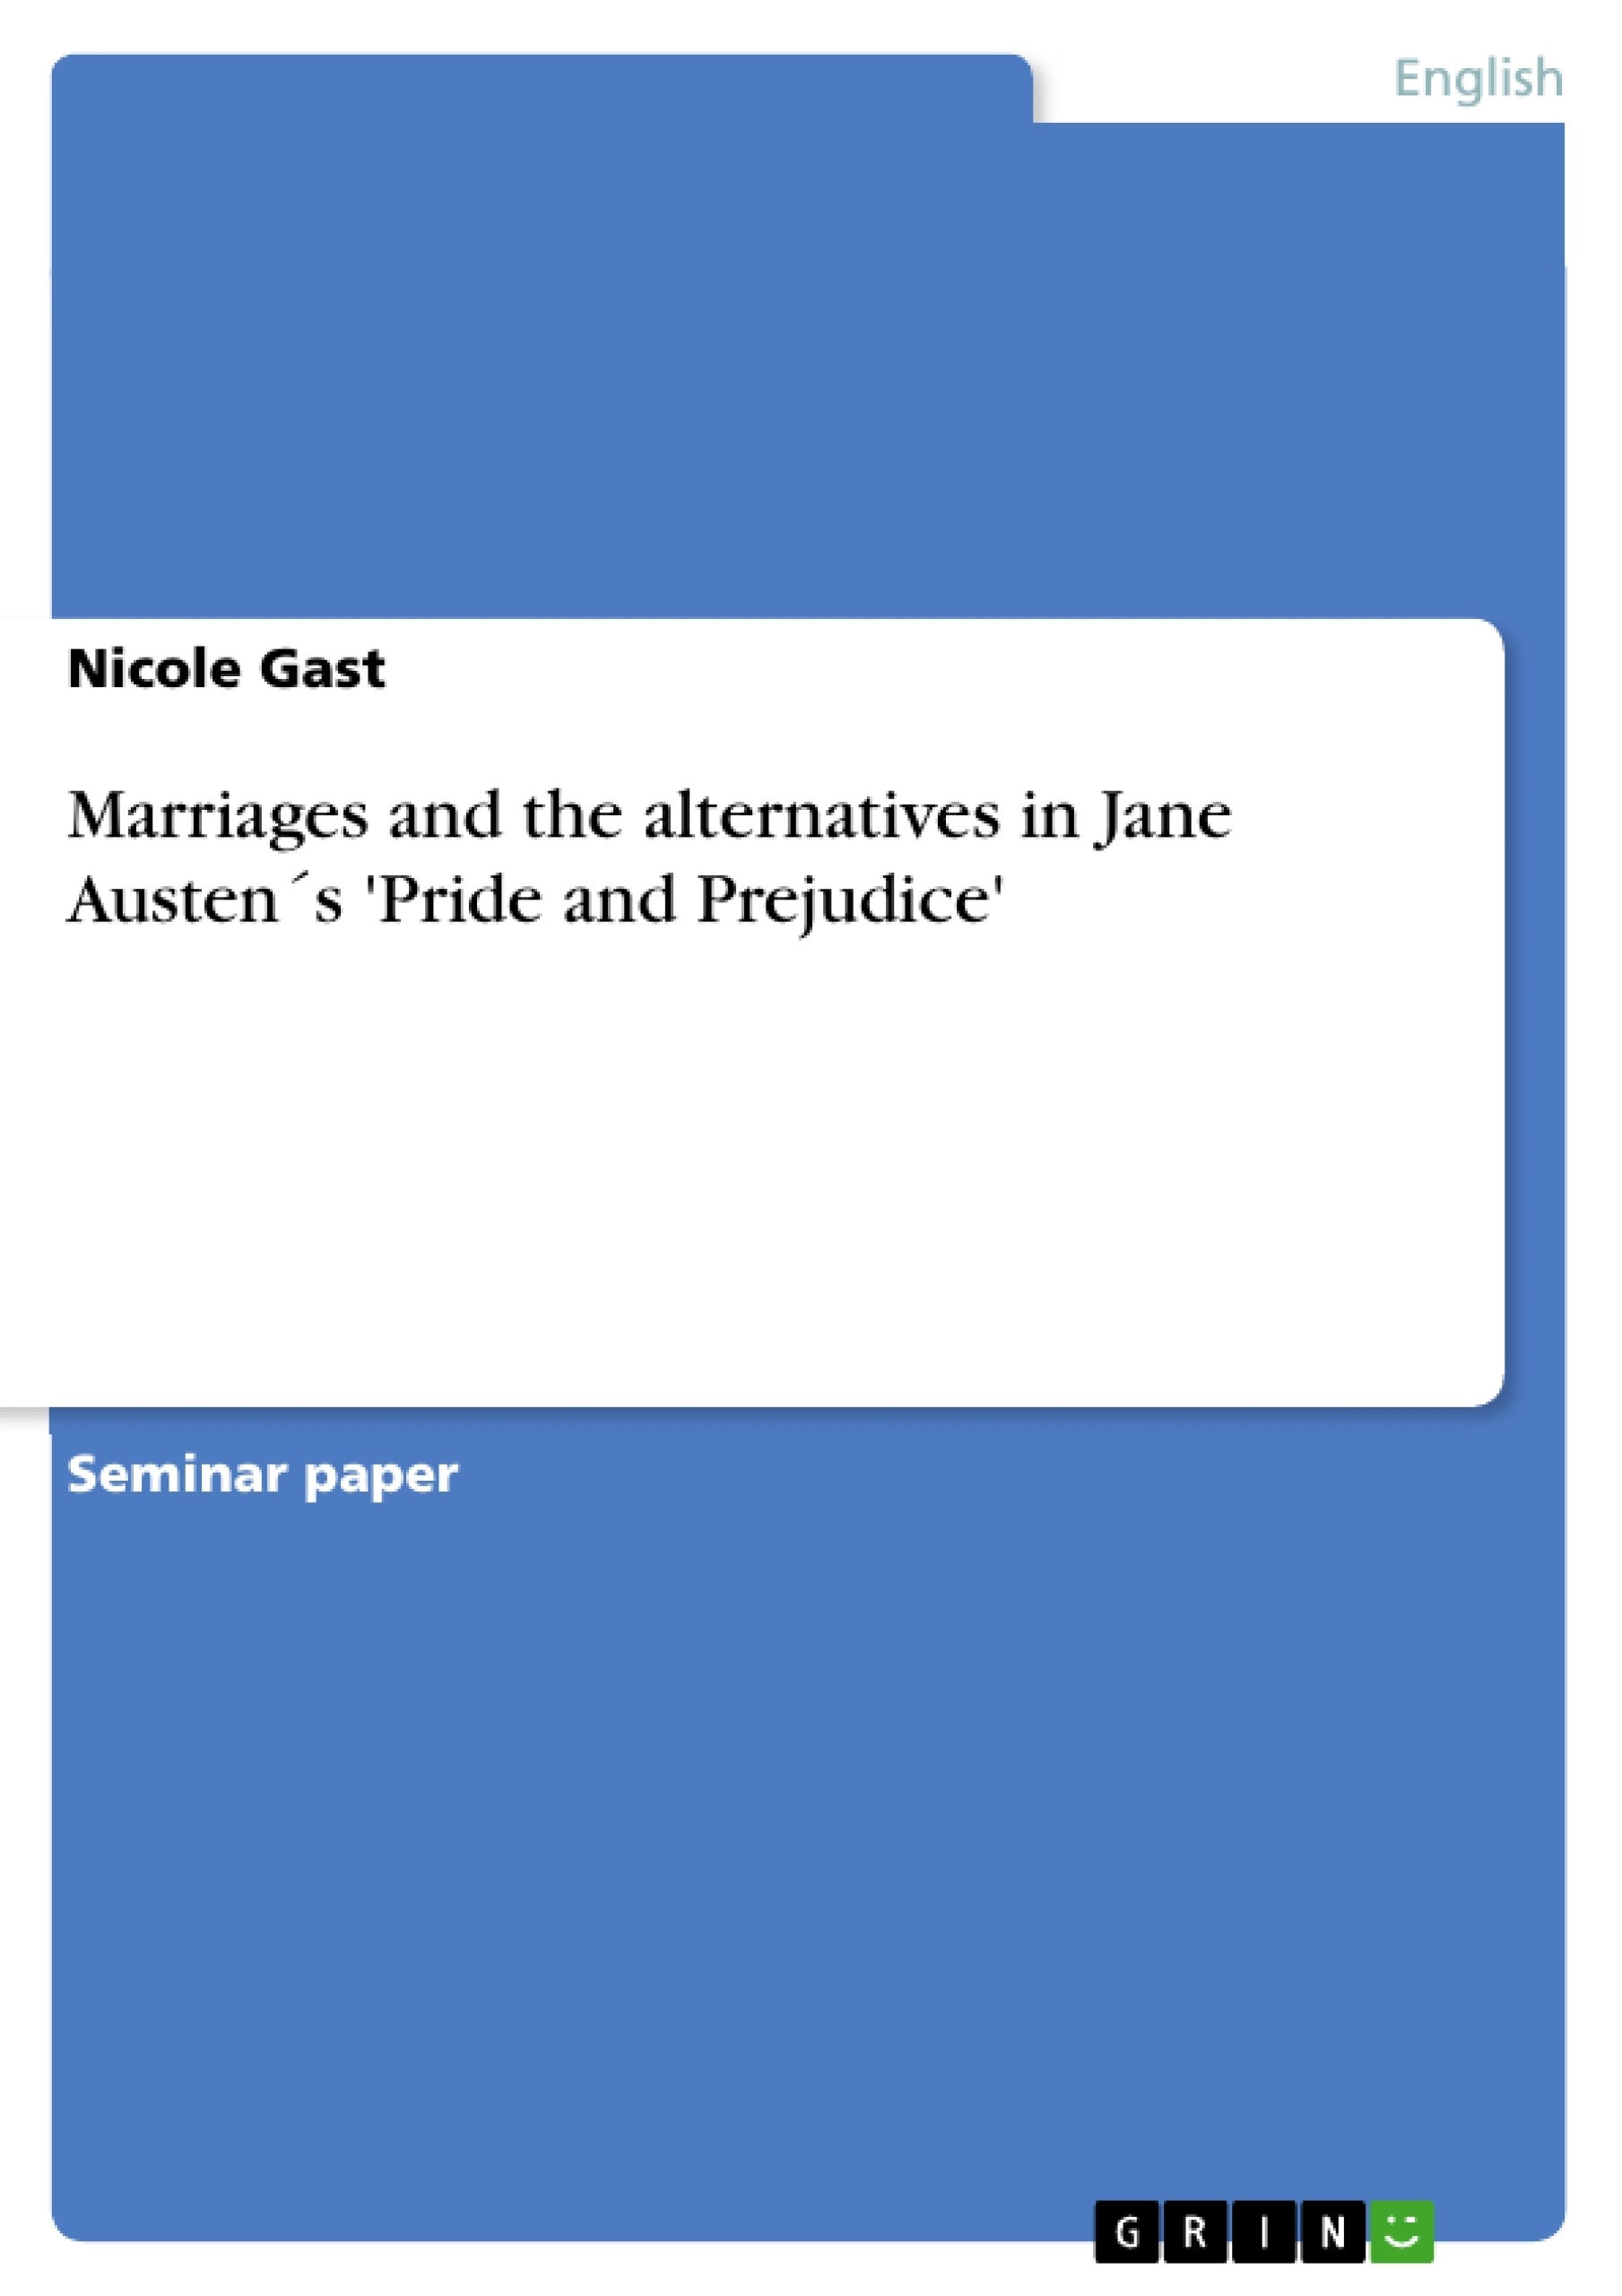 Título: Marriages and the alternatives in Jane Austen´s 'Pride and Prejudice'